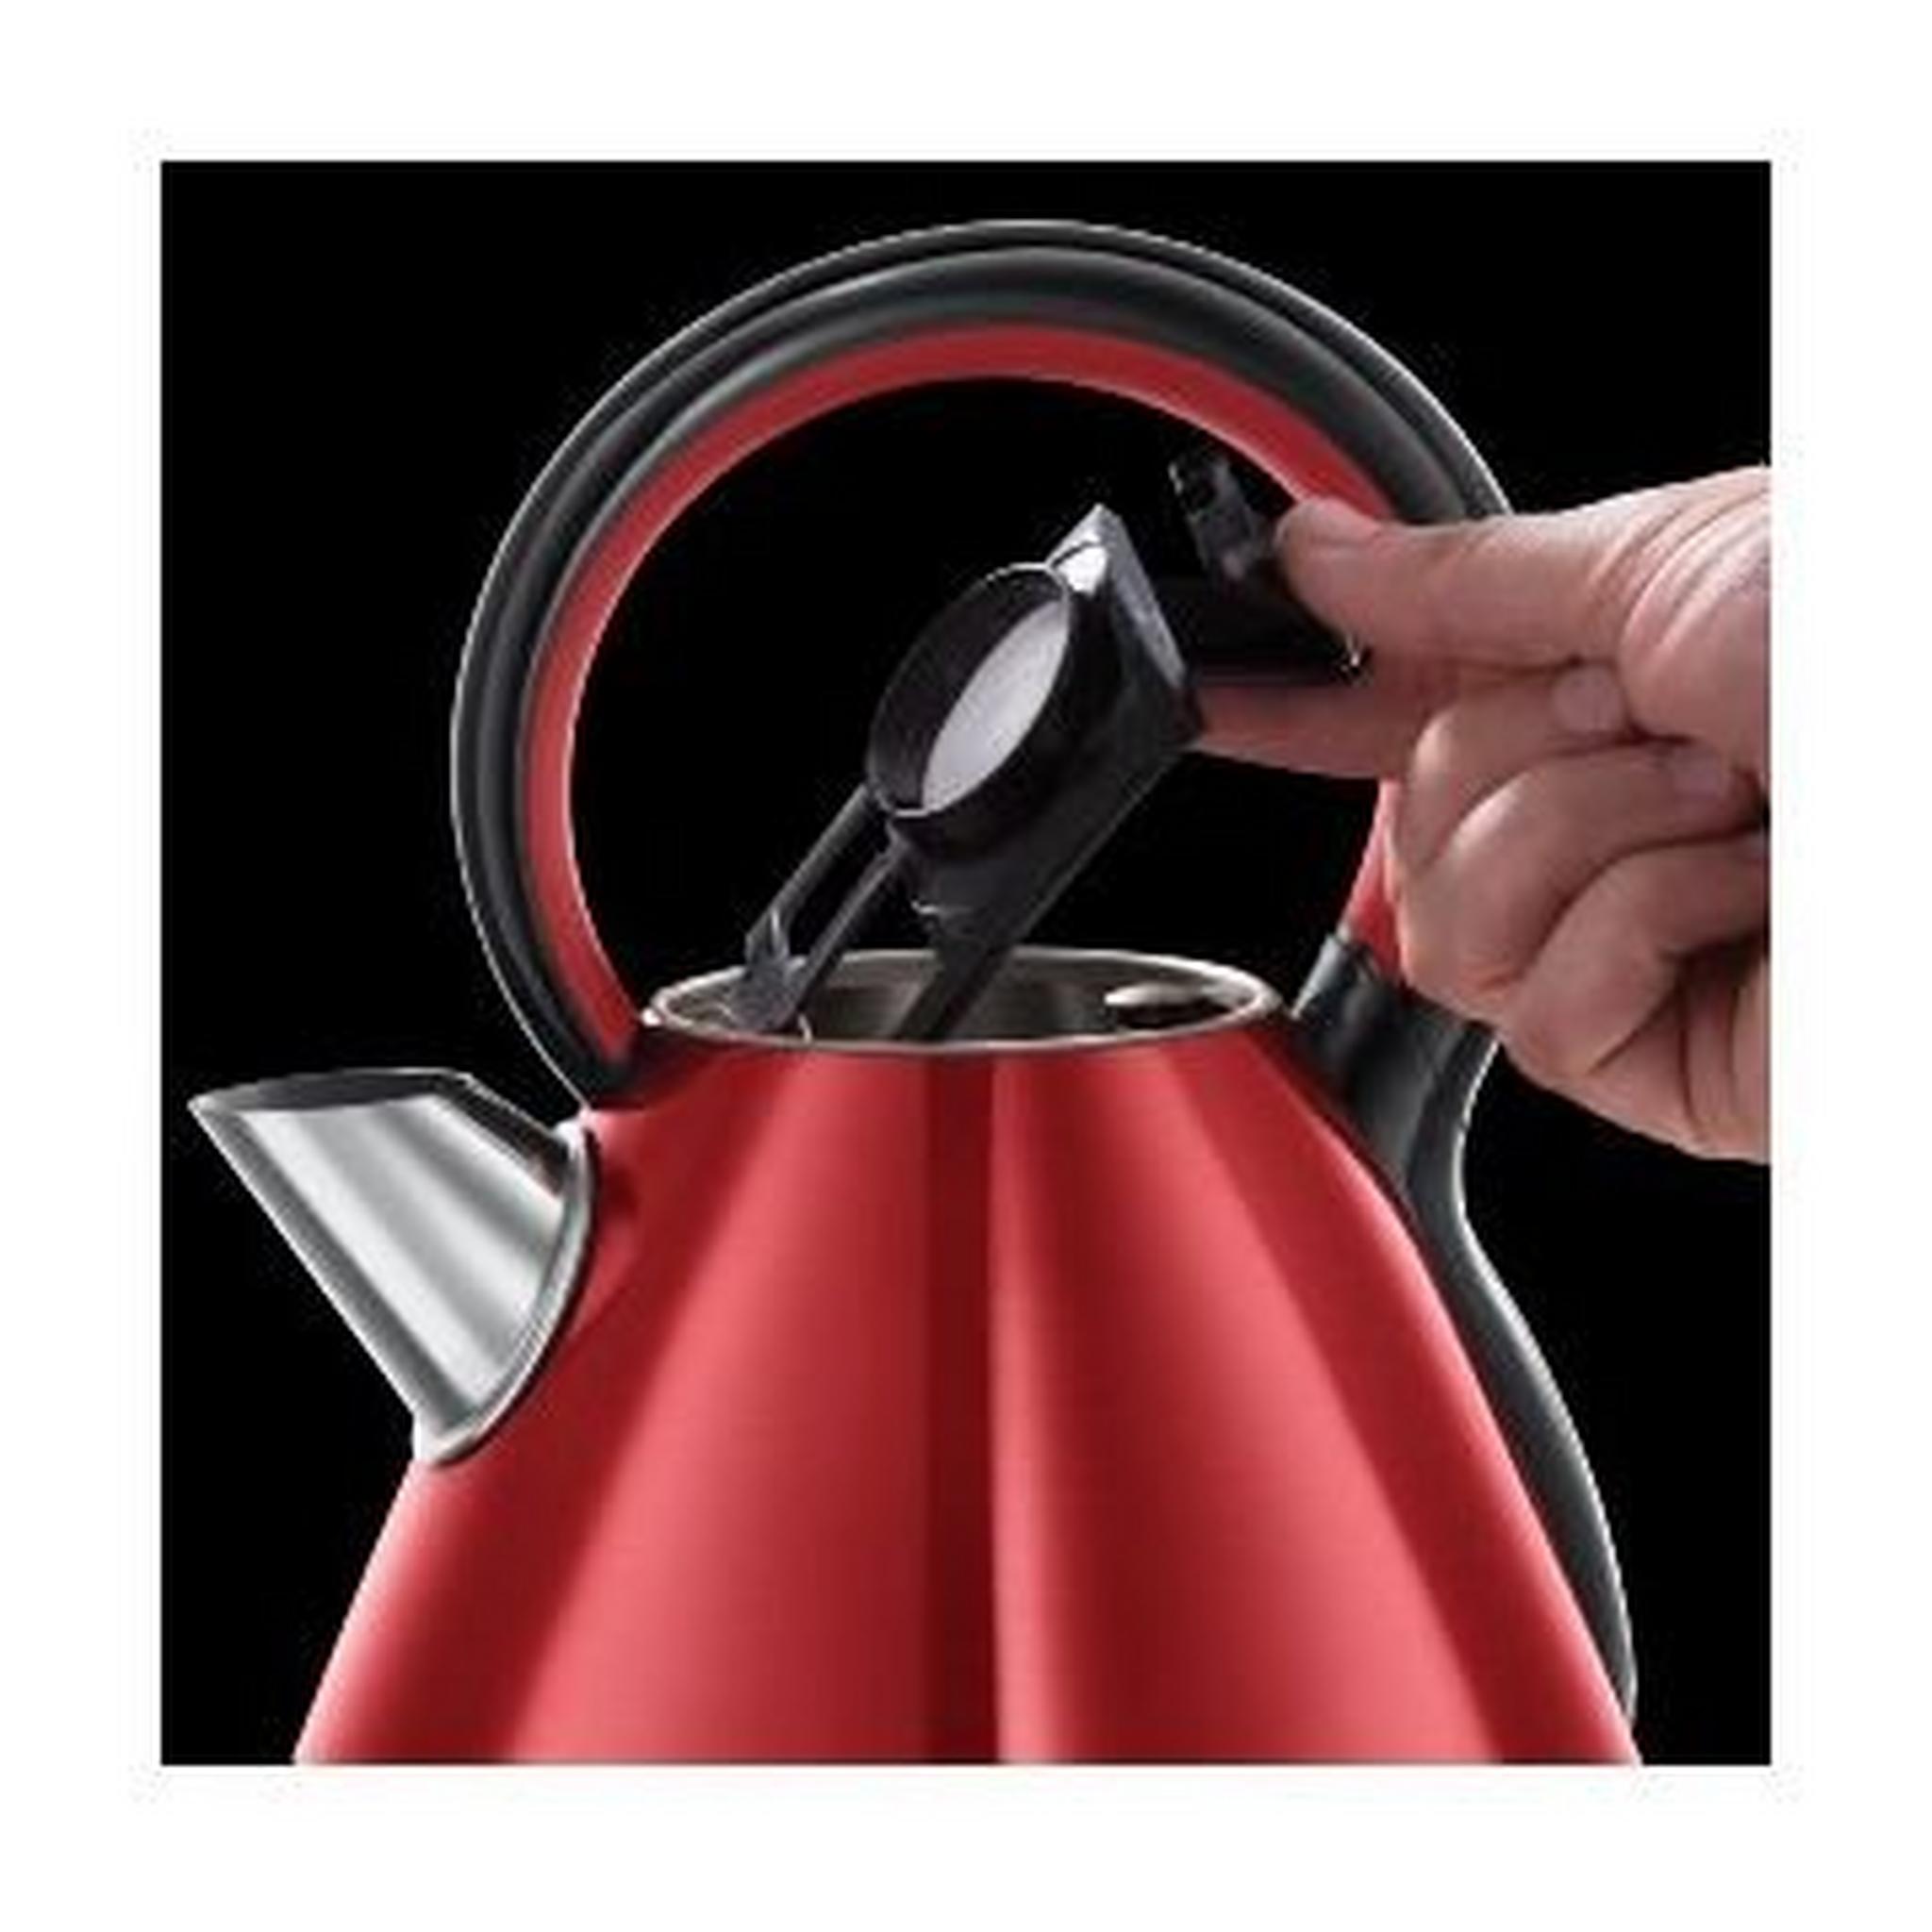 Russell Hobbs 1.7L Legacy Kettle (21881) - Red